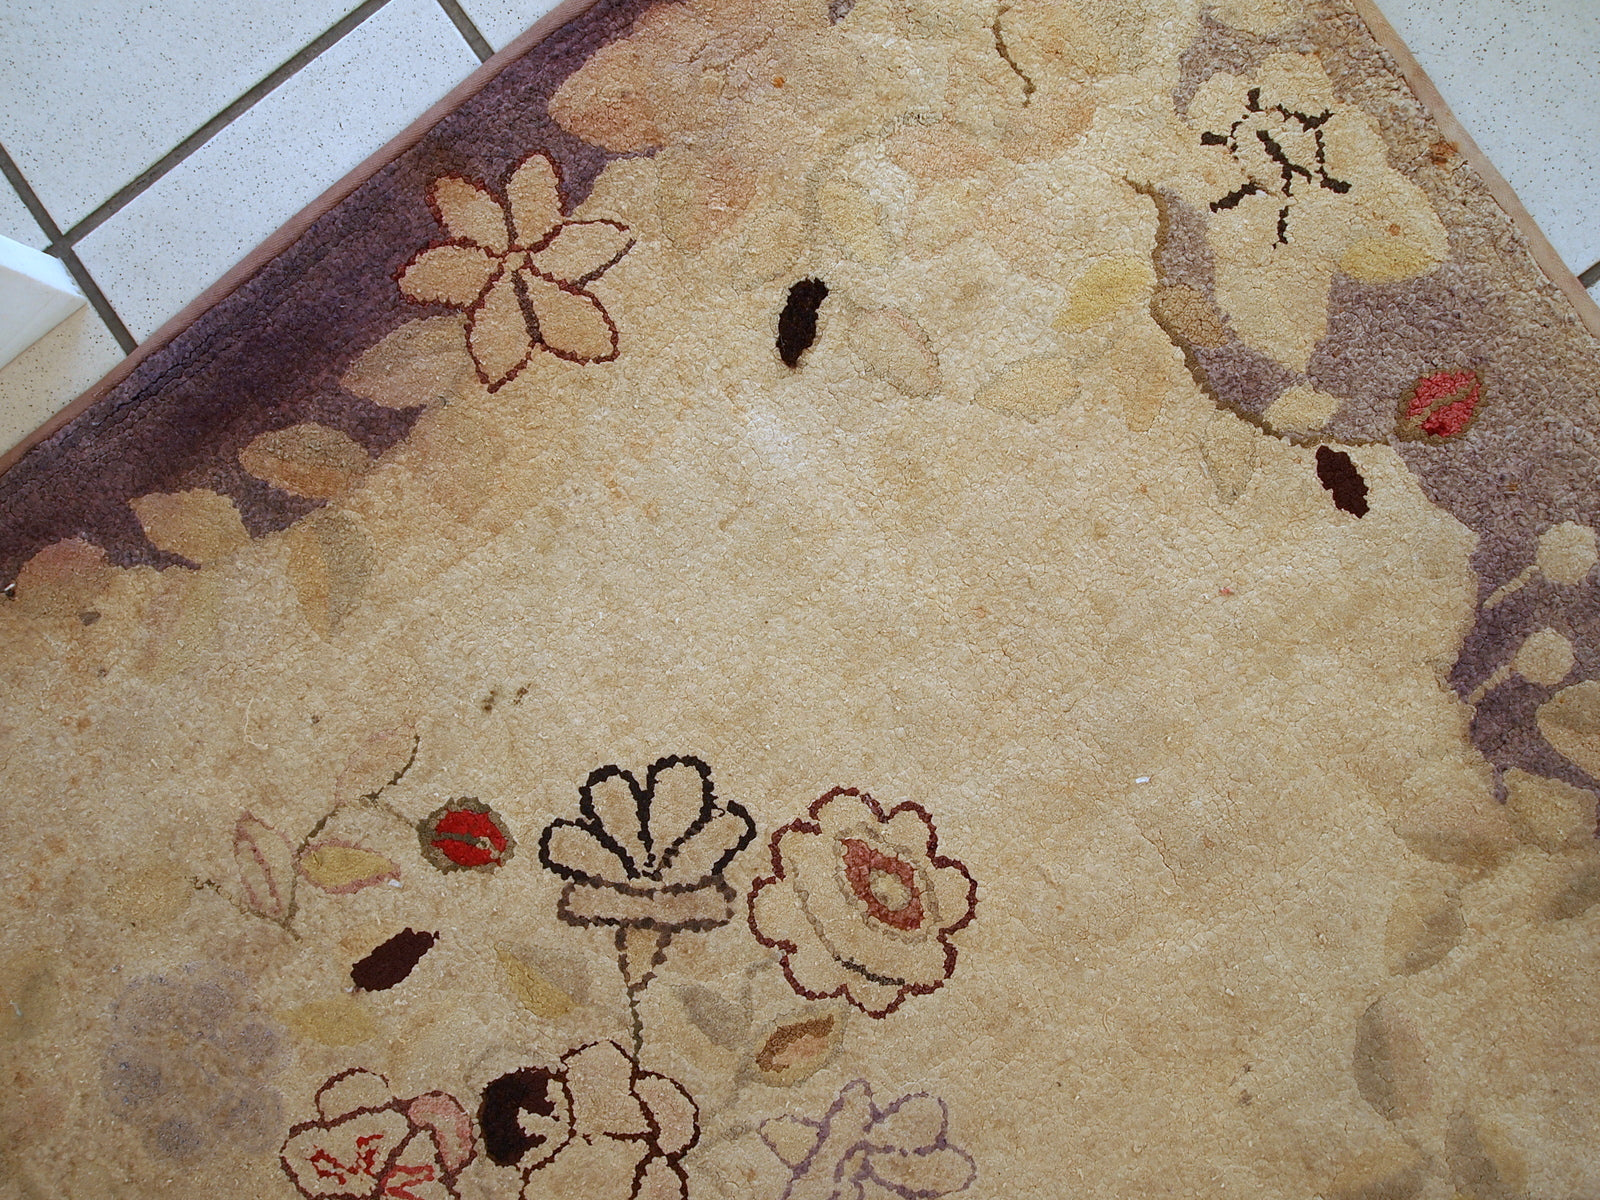 Handmade antique American Primitive Hooked rug in beige shade with abstract/floral design. The border is purple. It is in good condition.